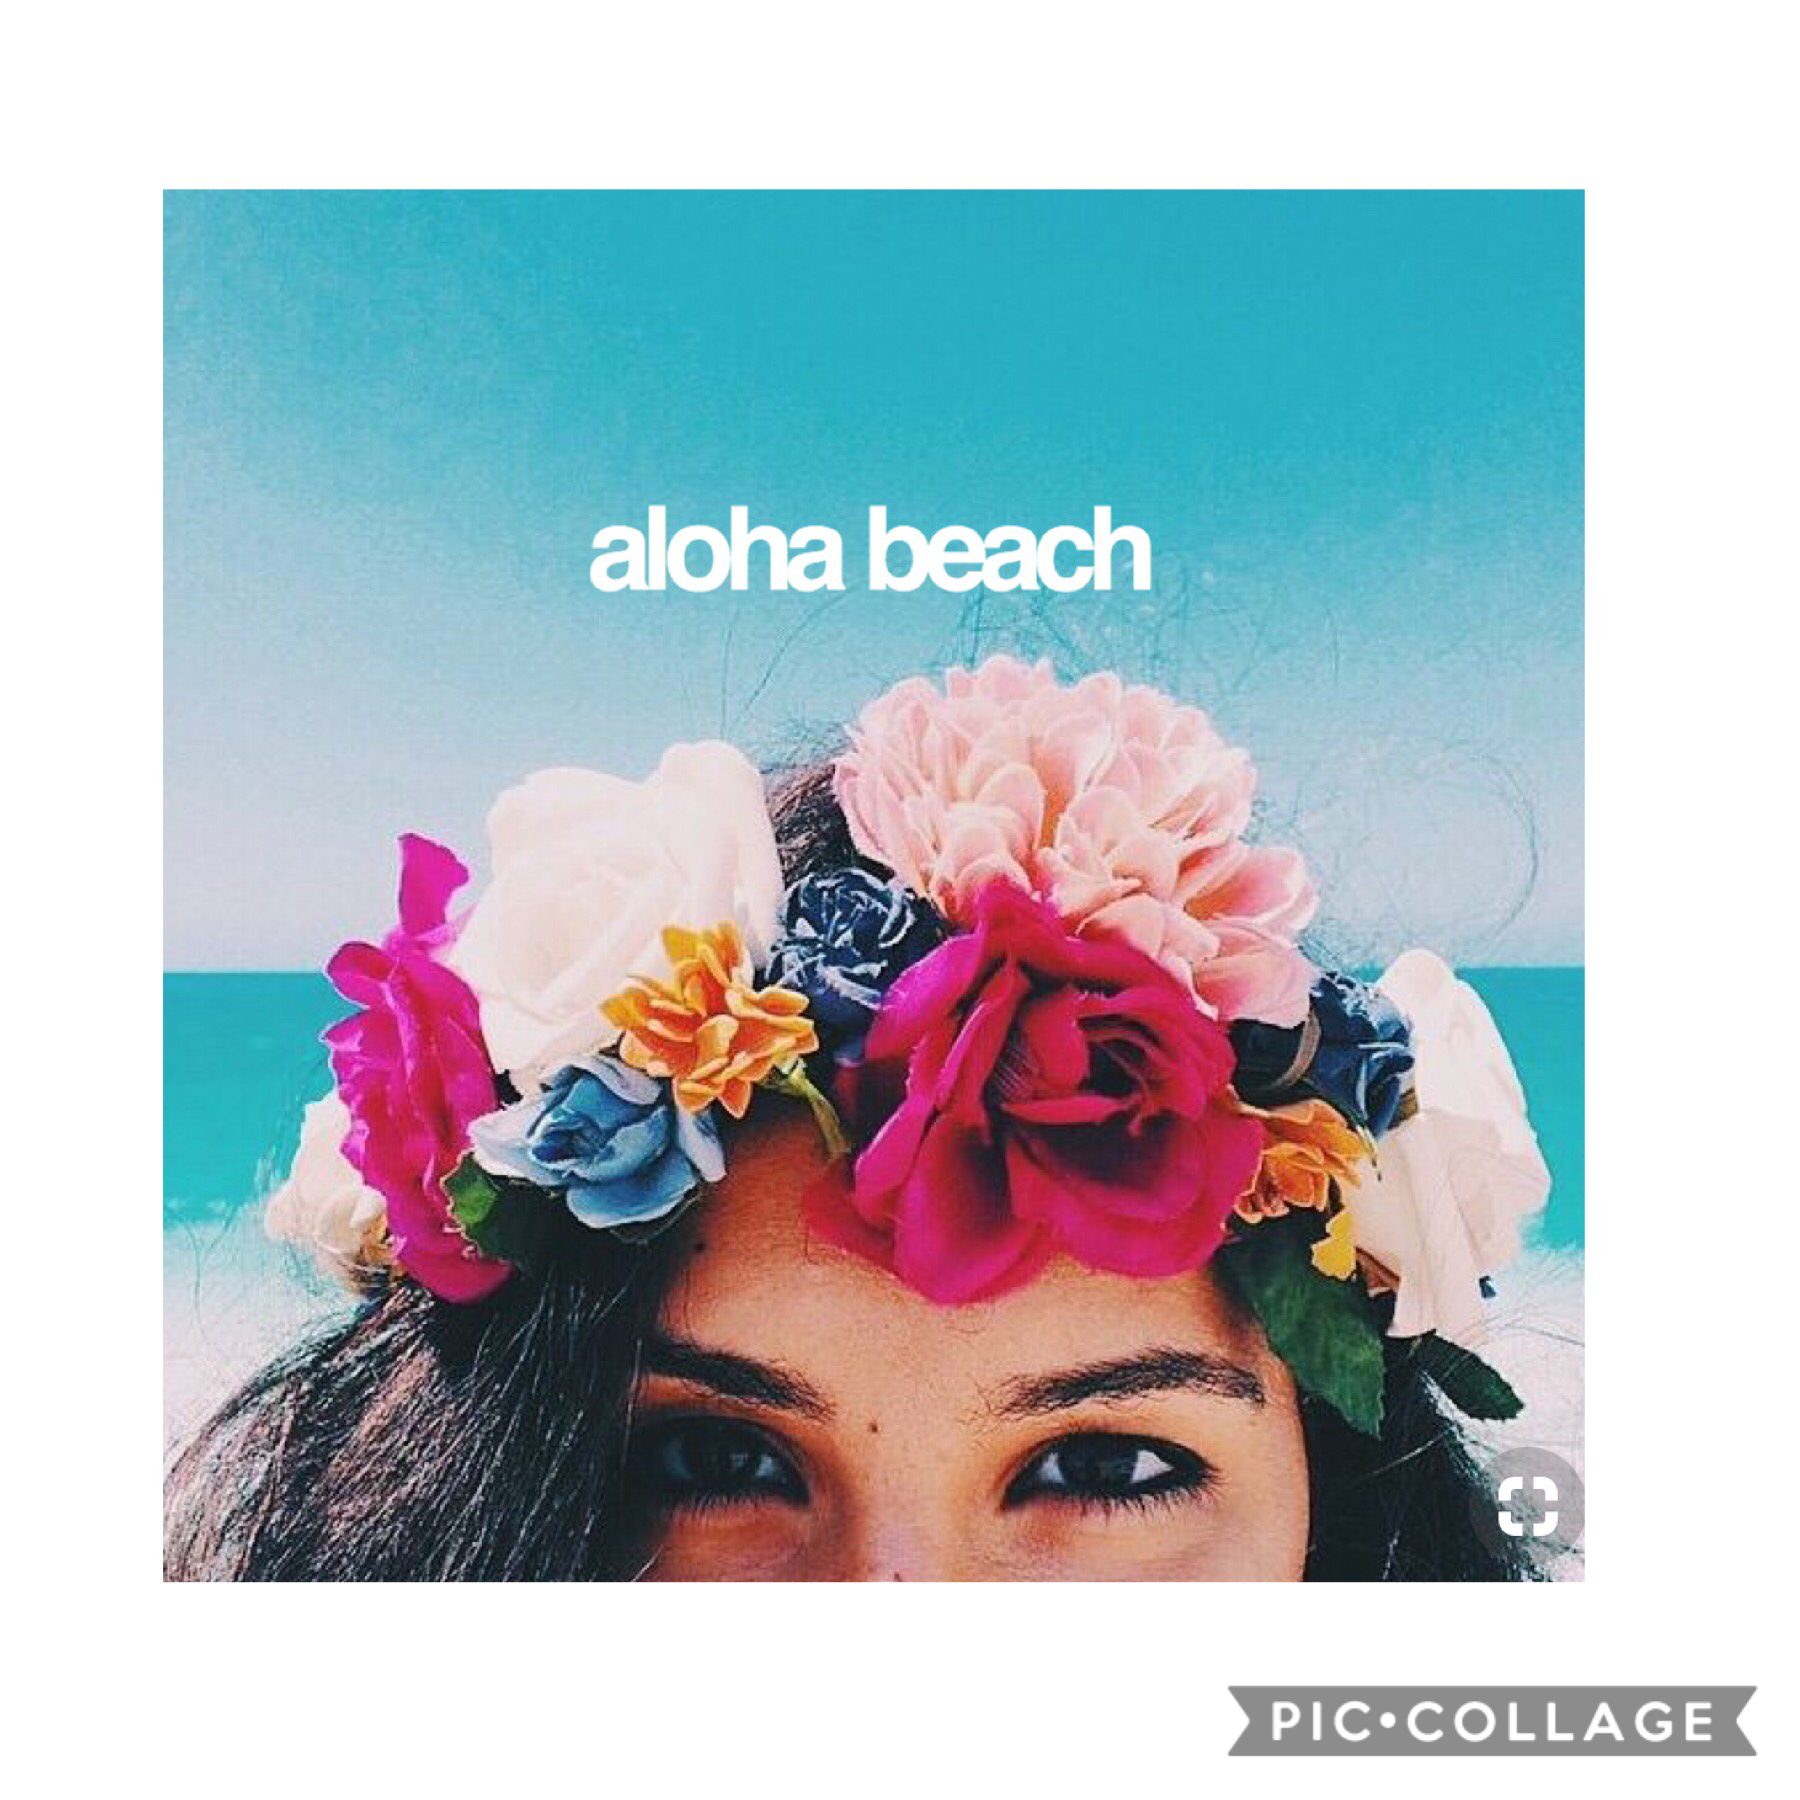 🍍Tap🍍

I’m not in Hawaii but aloha just sounds nice💕